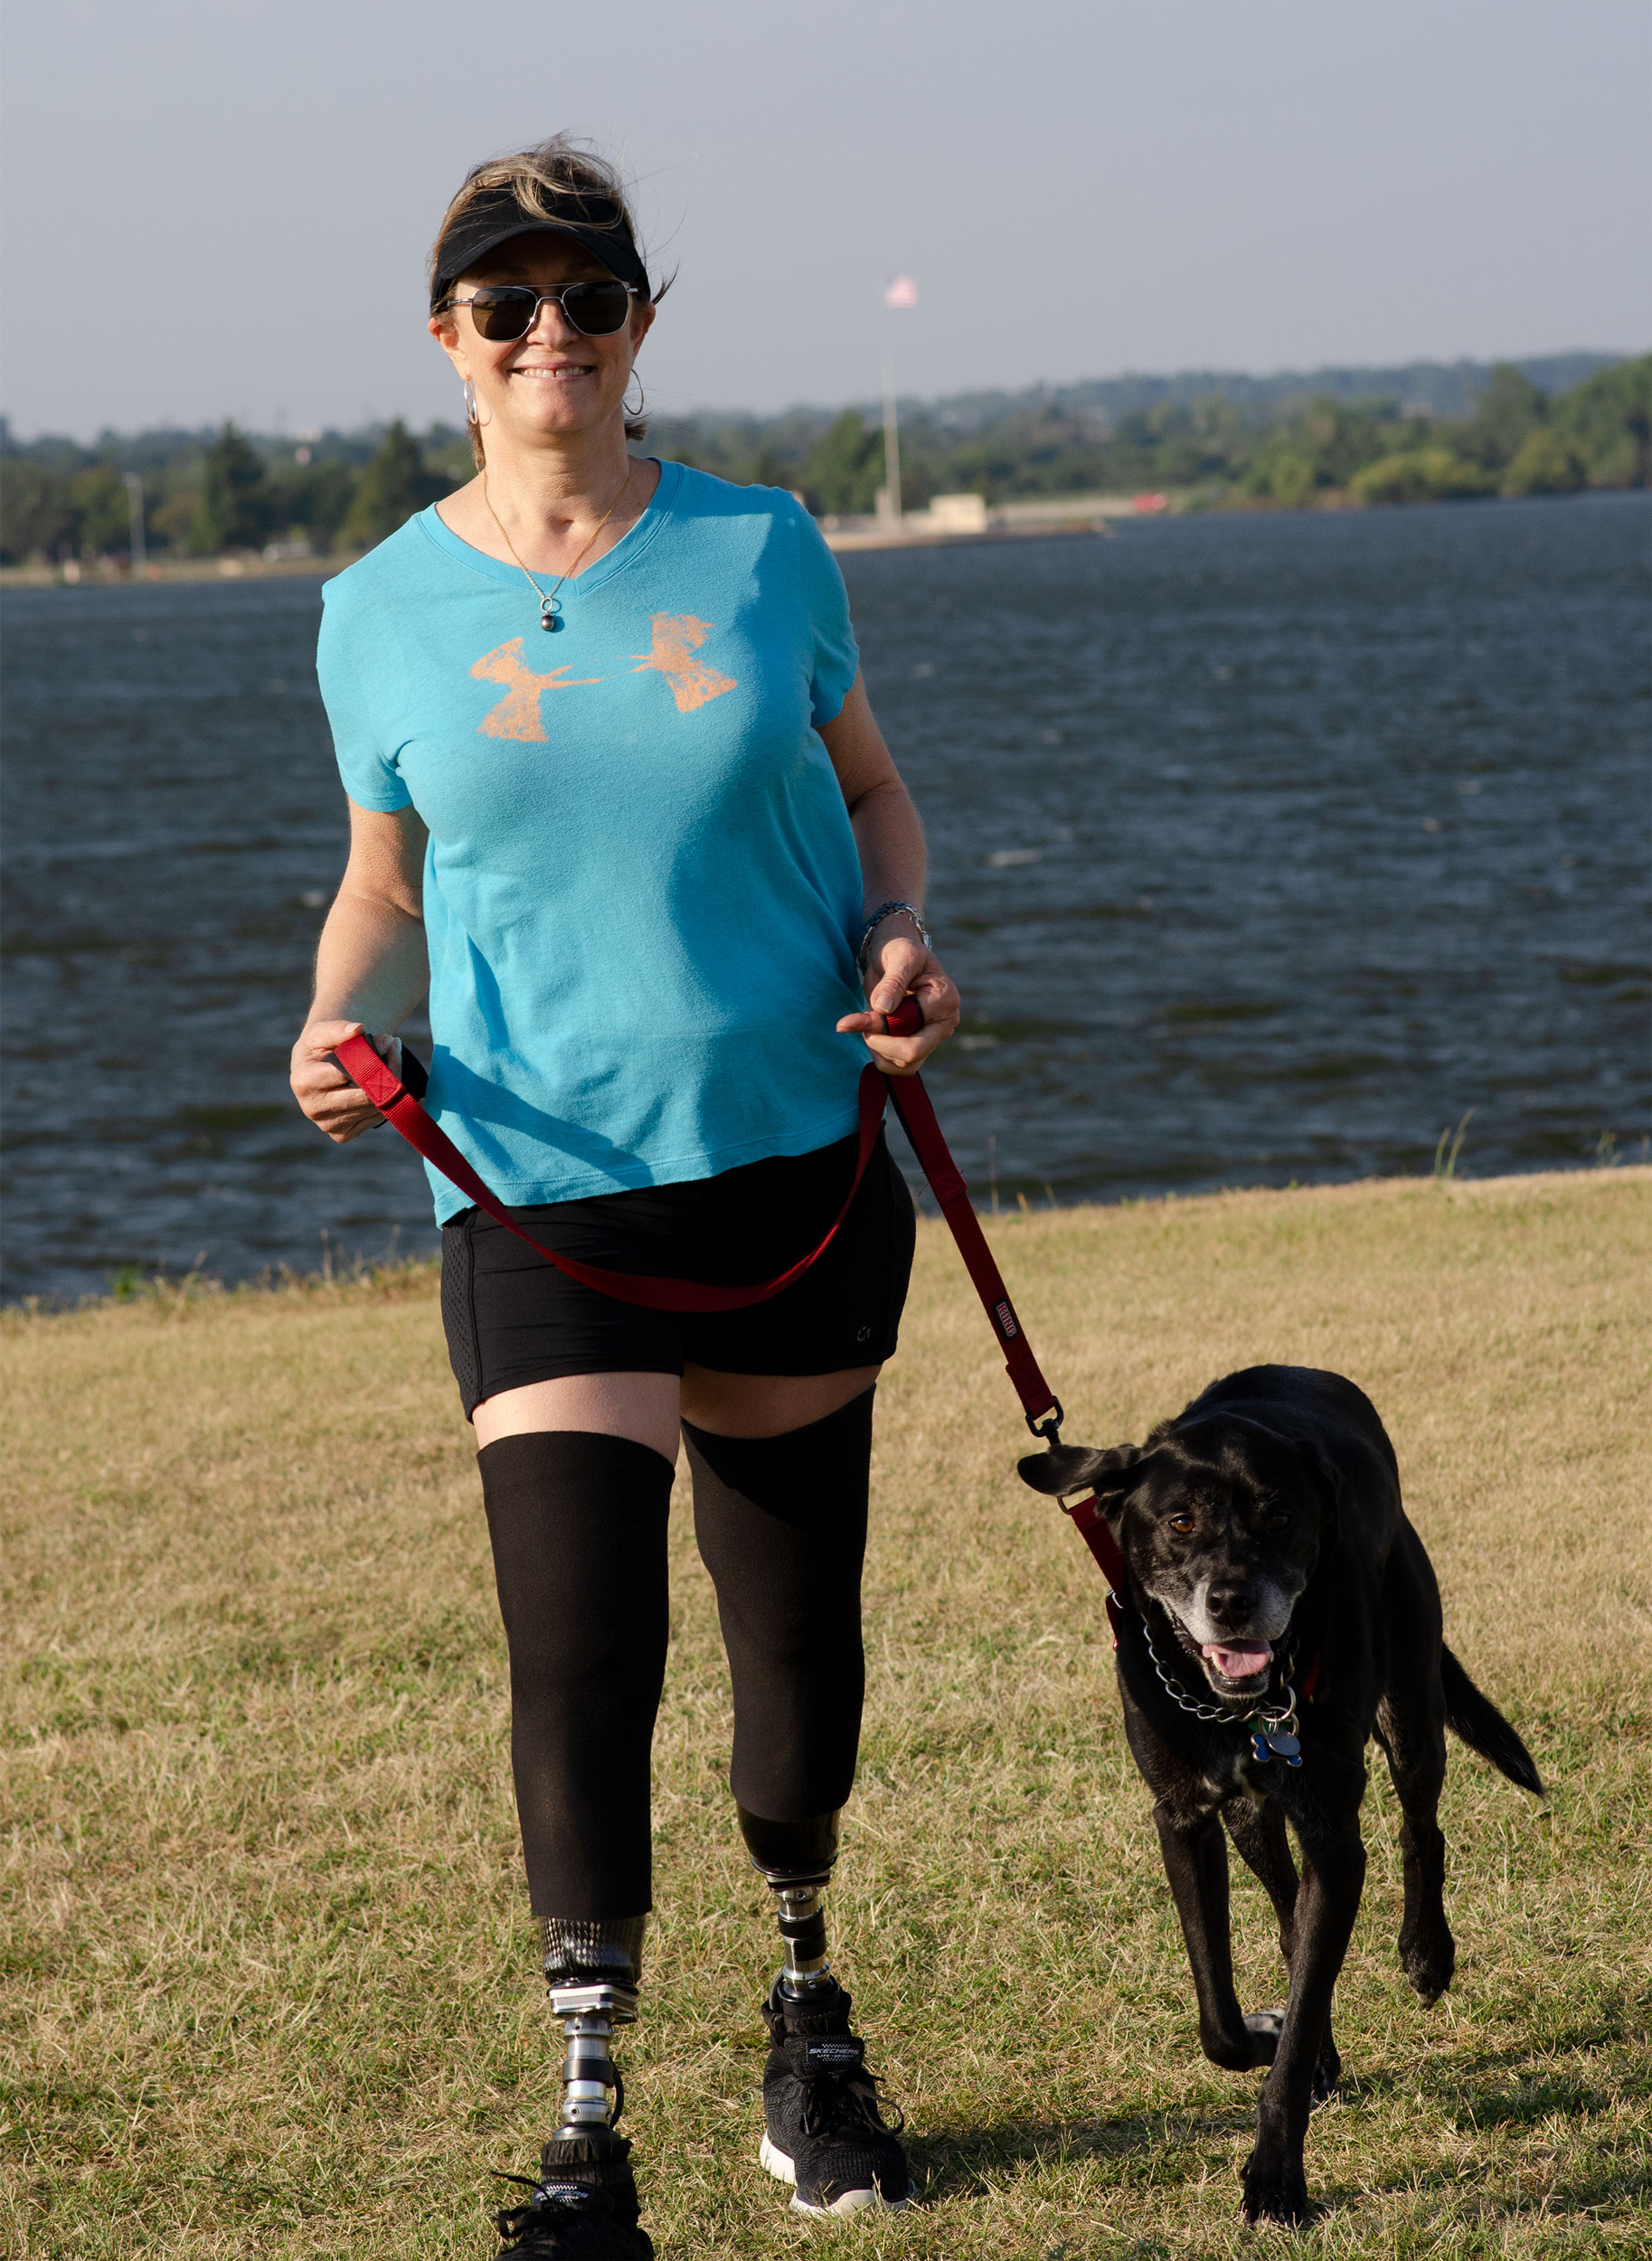 A woman who is a double amputee walk her dog at the lake.